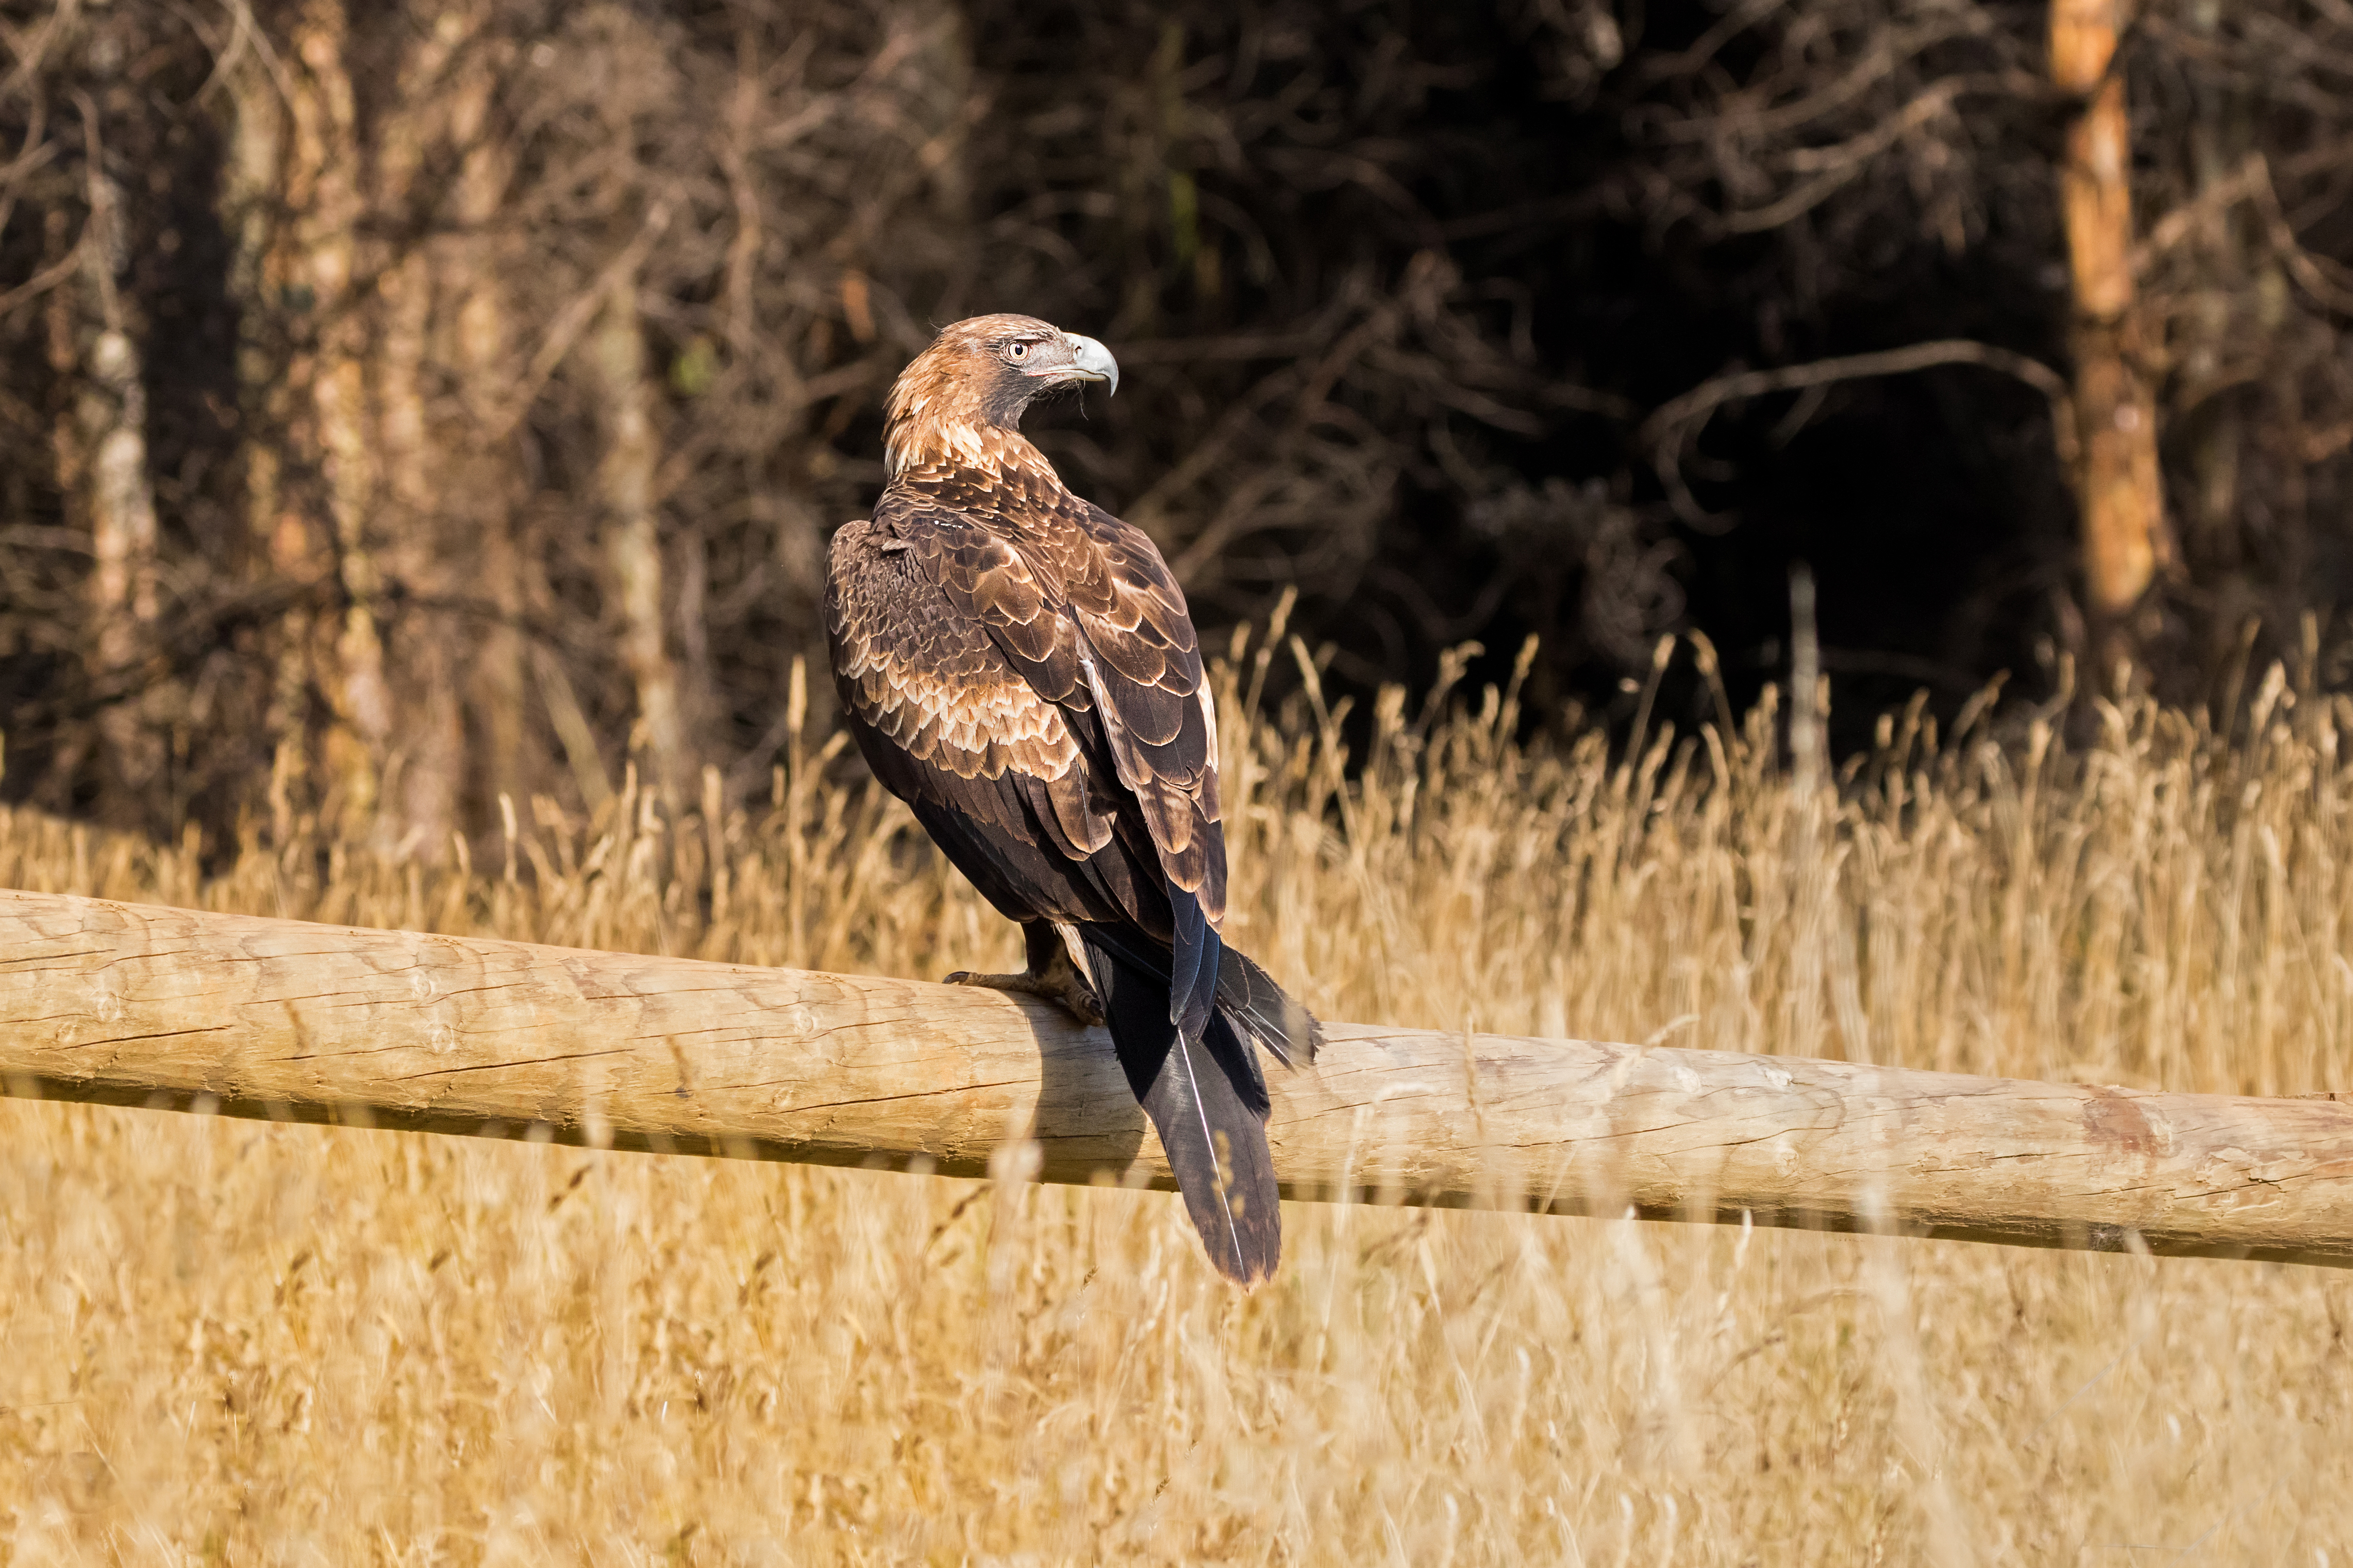 Wedge tailed eagle perched on a branch